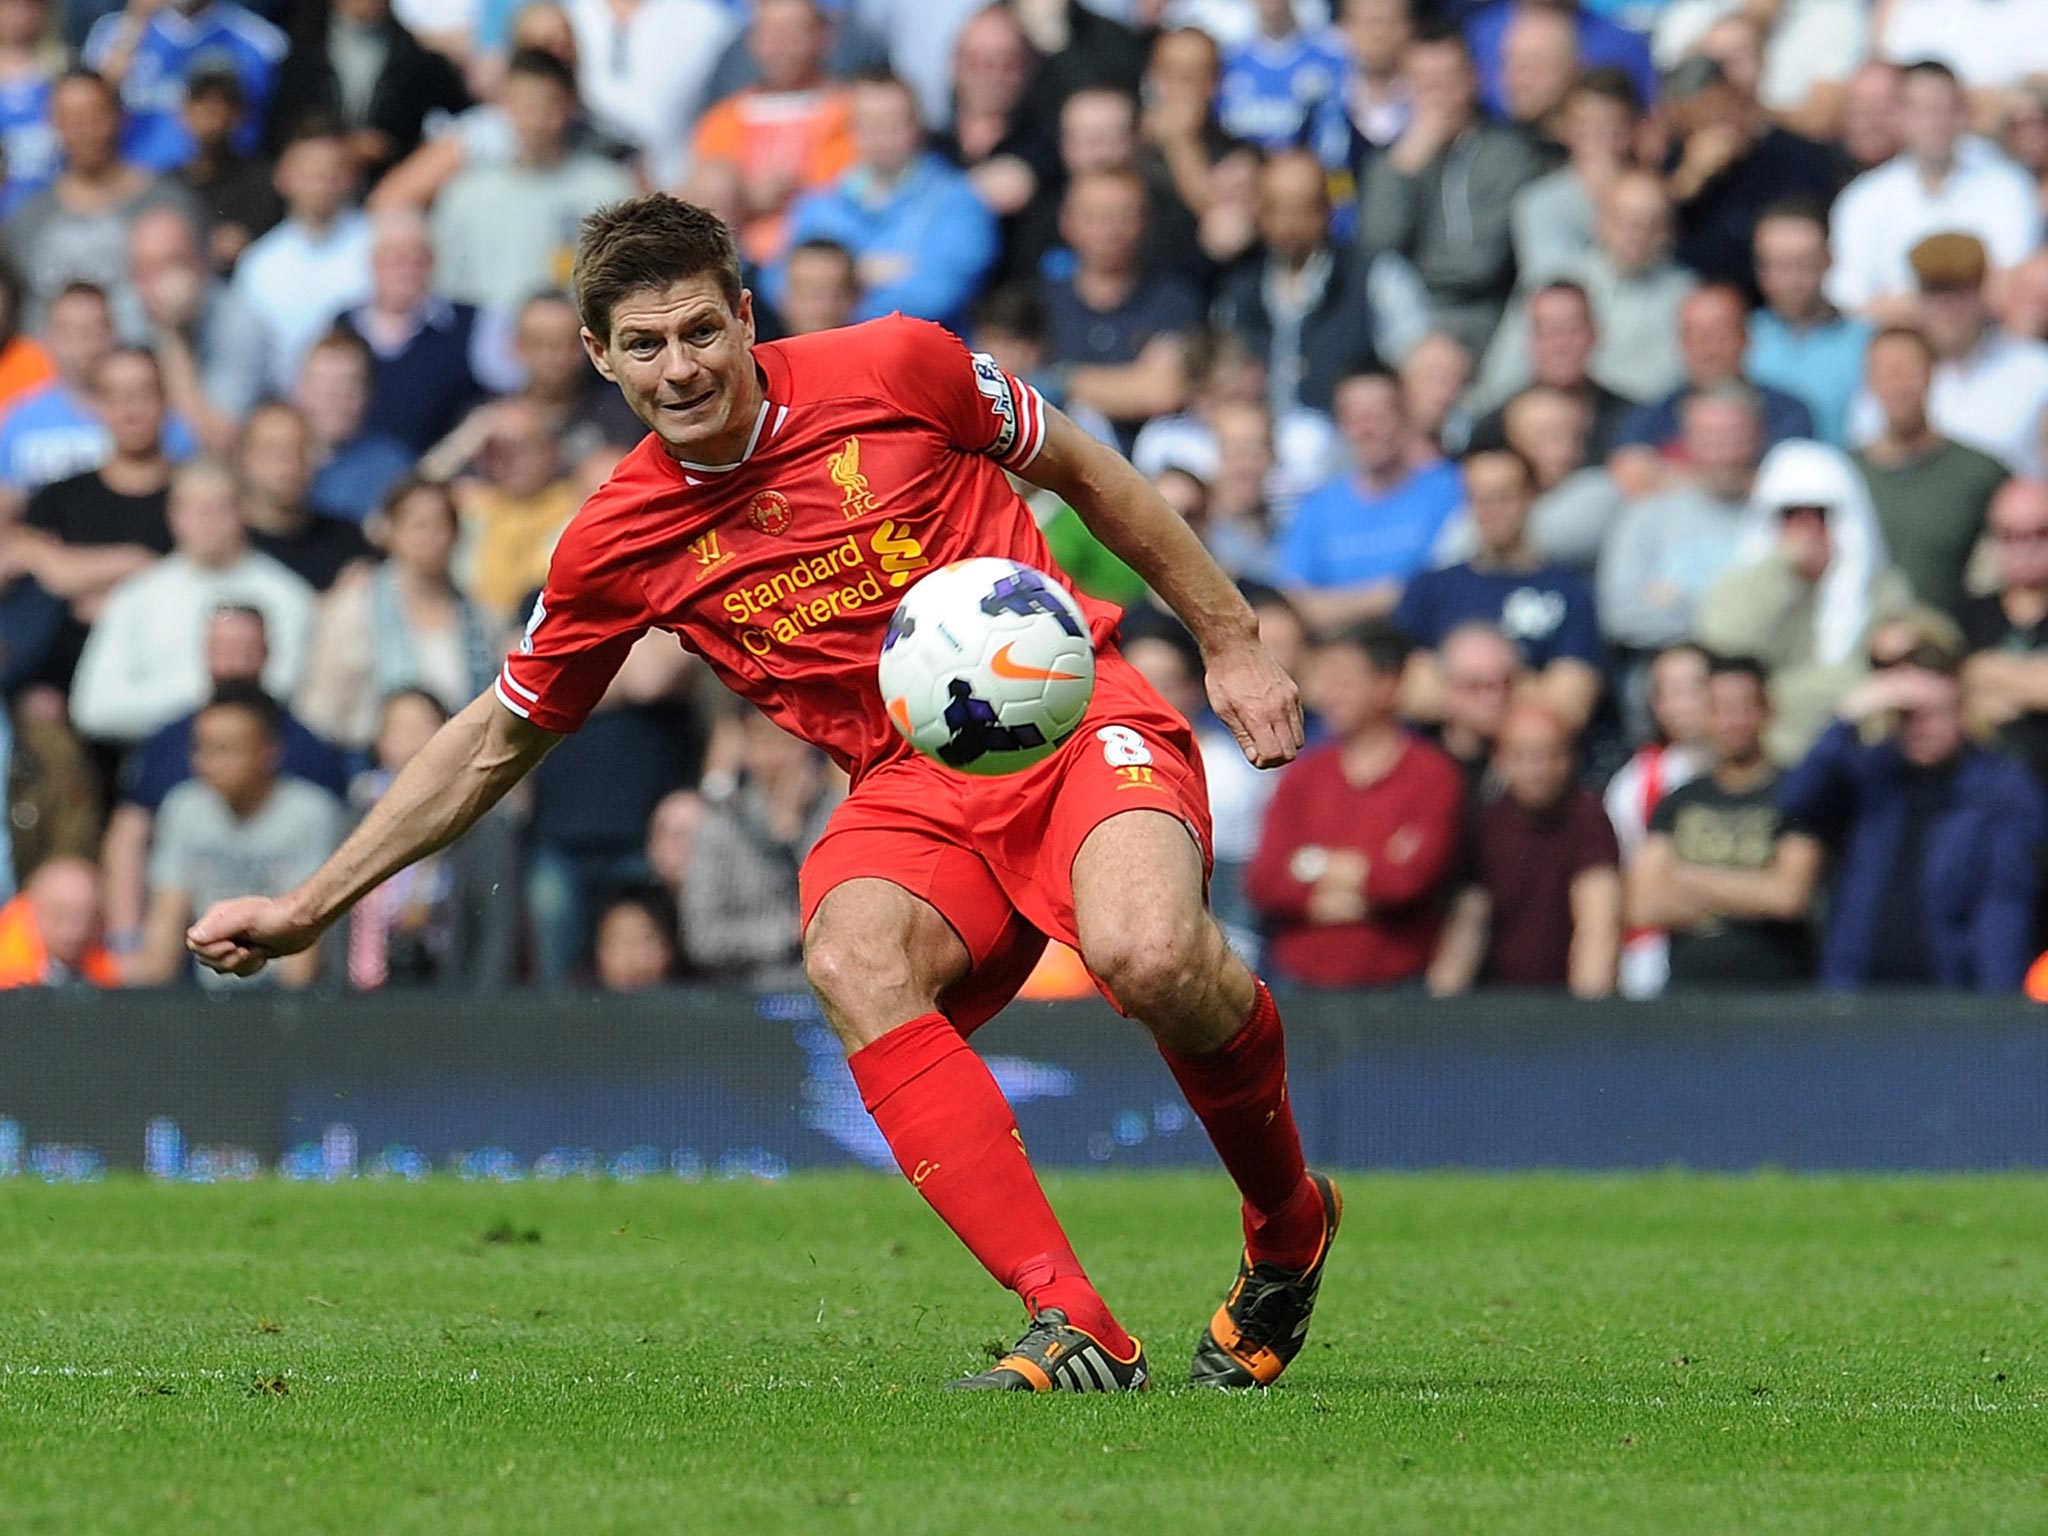 Steven Gerrard in action for Liverpool during the 2-0 defeat to Chelsea